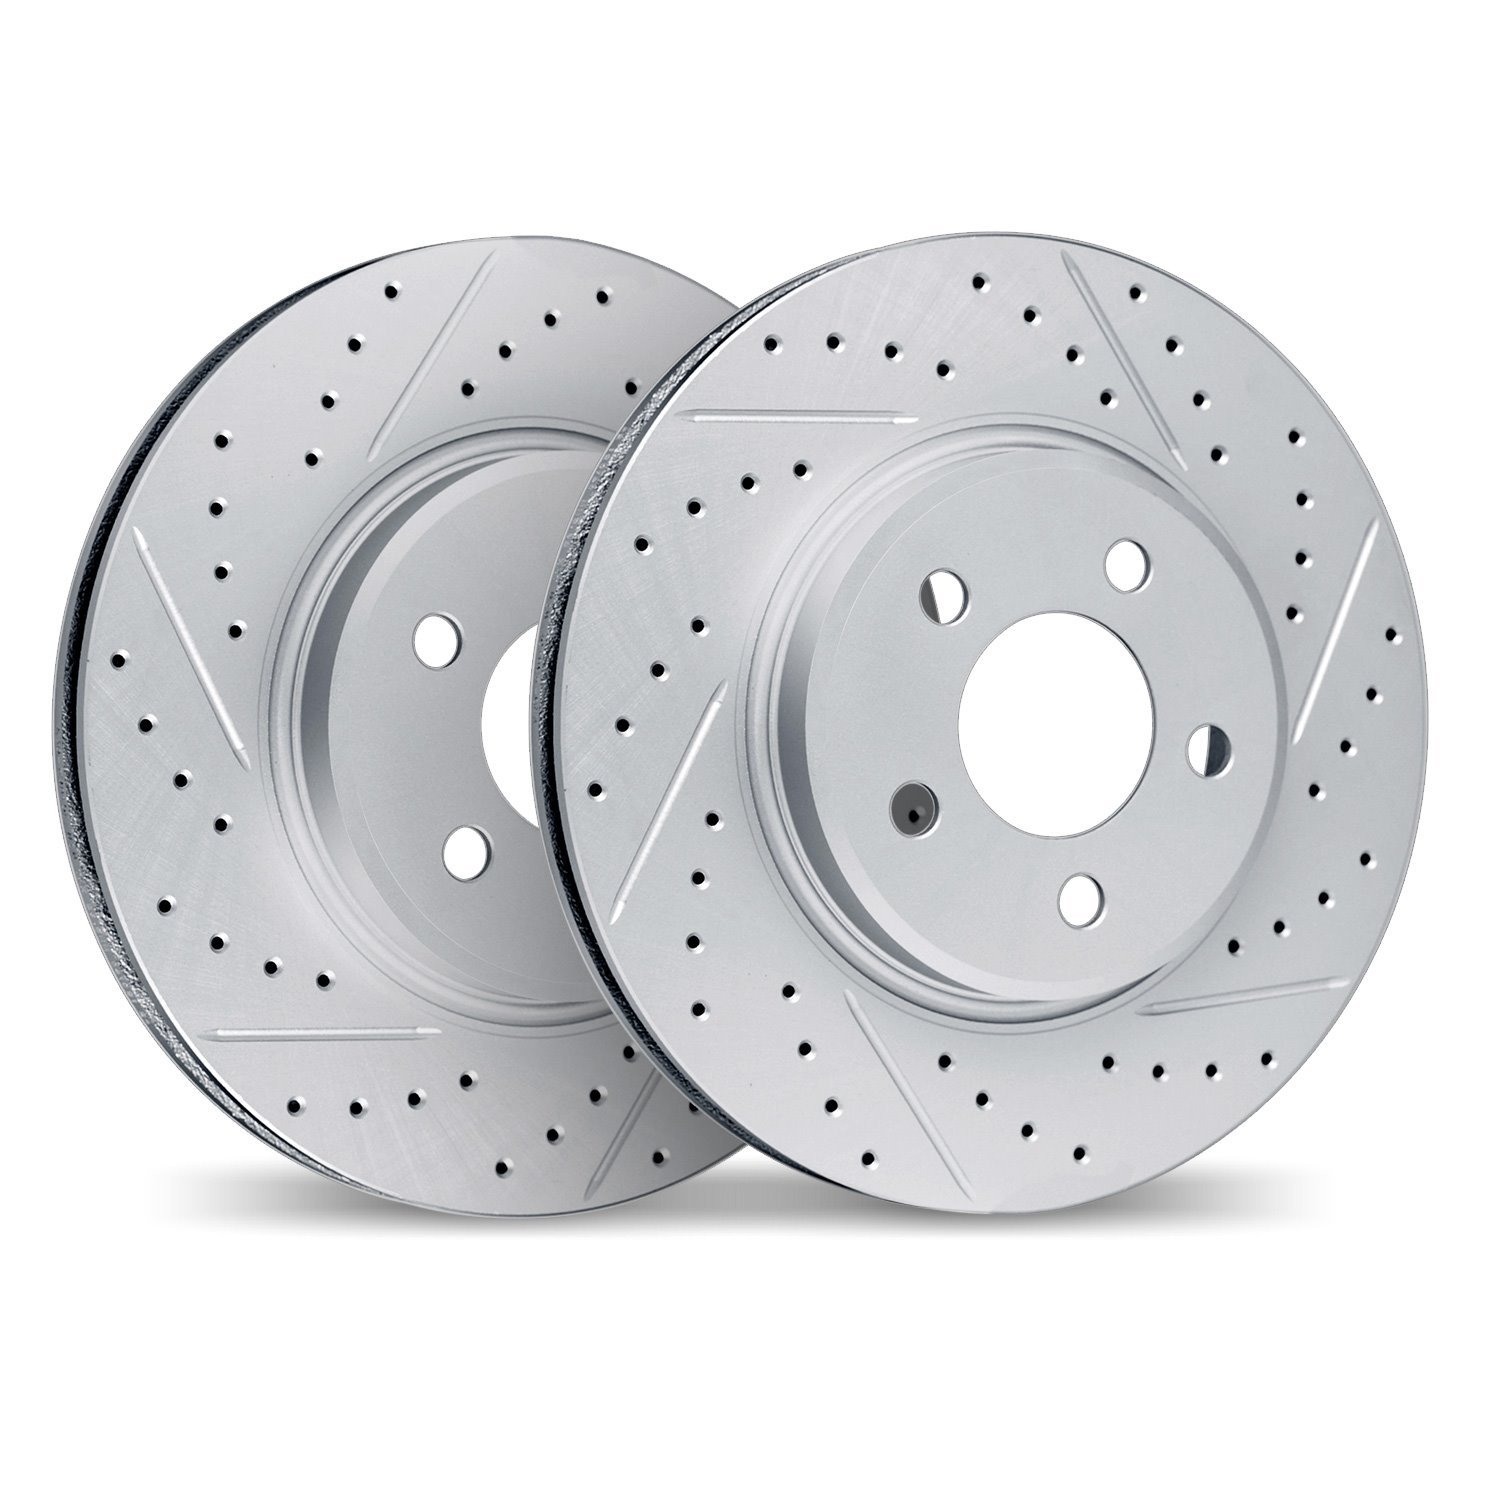 2002-54110 Geoperformance Drilled/Slotted Brake Rotors, 2010-2013 Ford/Lincoln/Mercury/Mazda, Position: Front